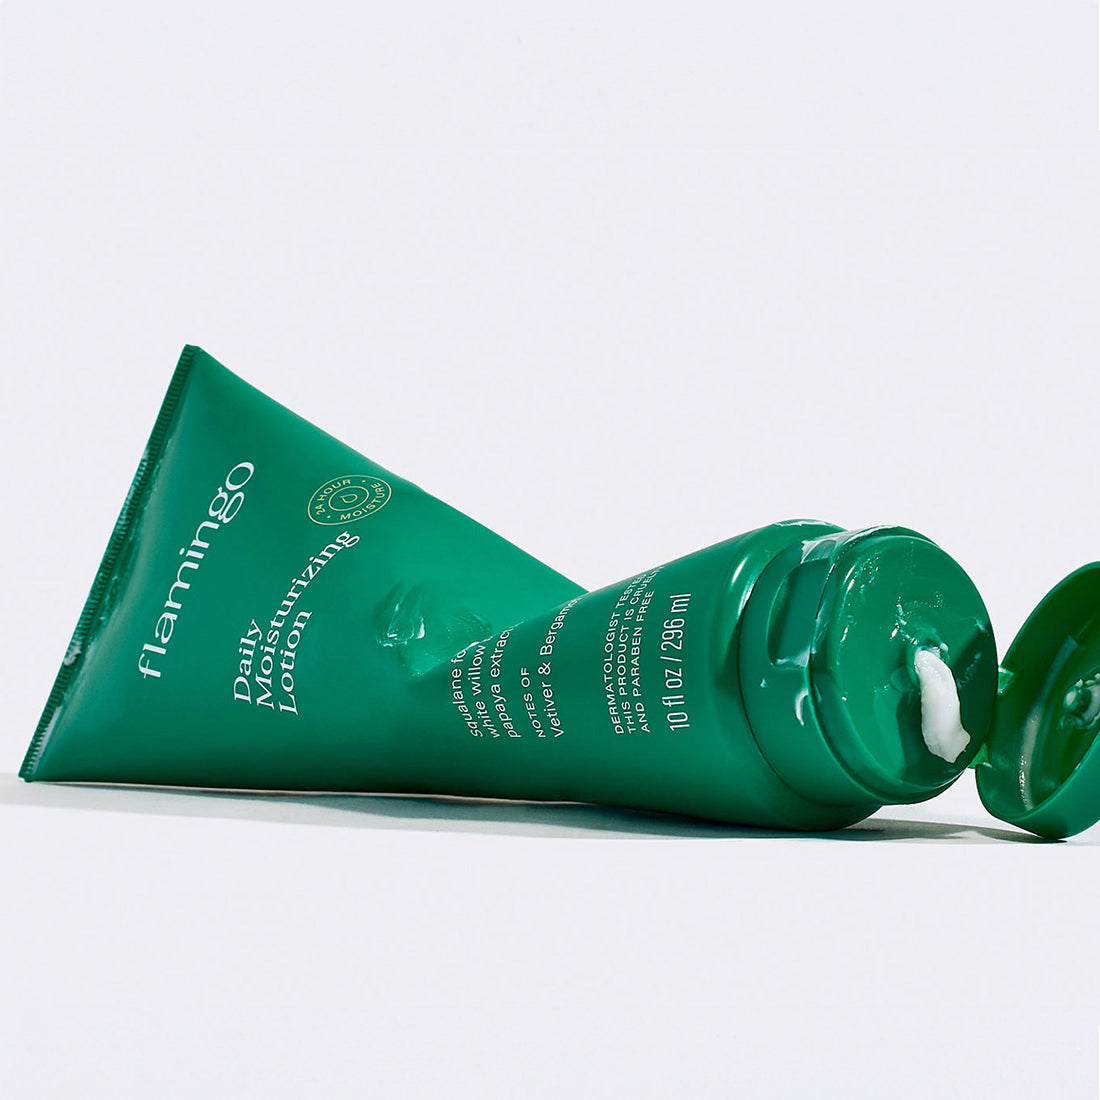 Green tube of Flamingo Daily Moisturizing Lotion pictured sideways and squeezed like it has just been used